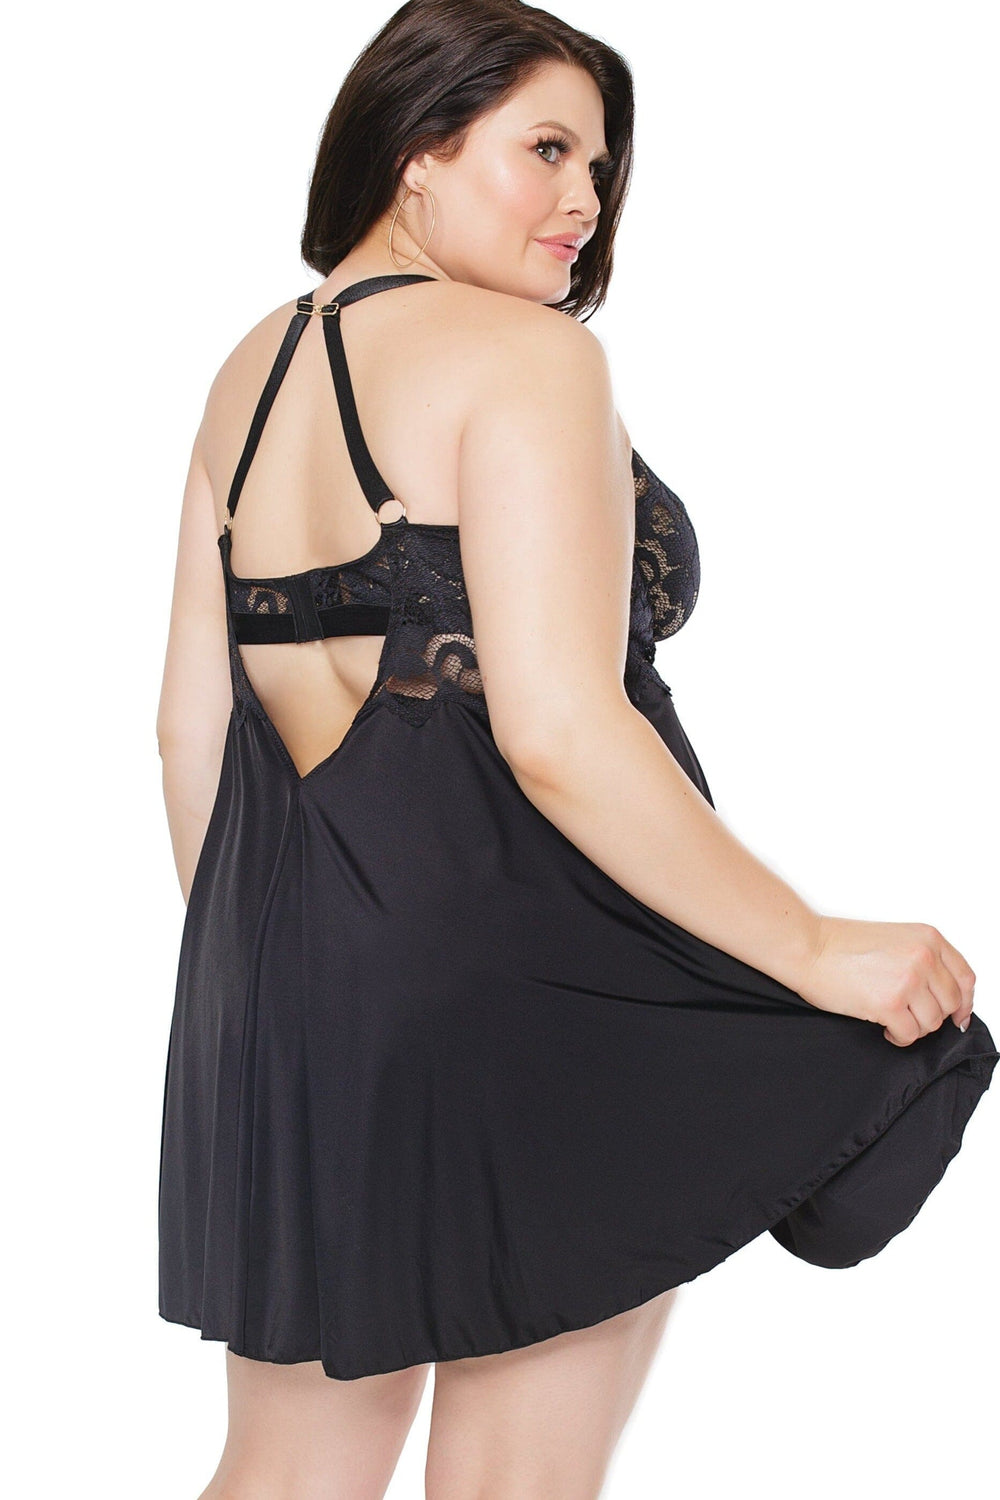 Lace Babydoll Set With Side Open Slit | Plus Size-Babydolls-Coquette-SEXYSHOES.COM